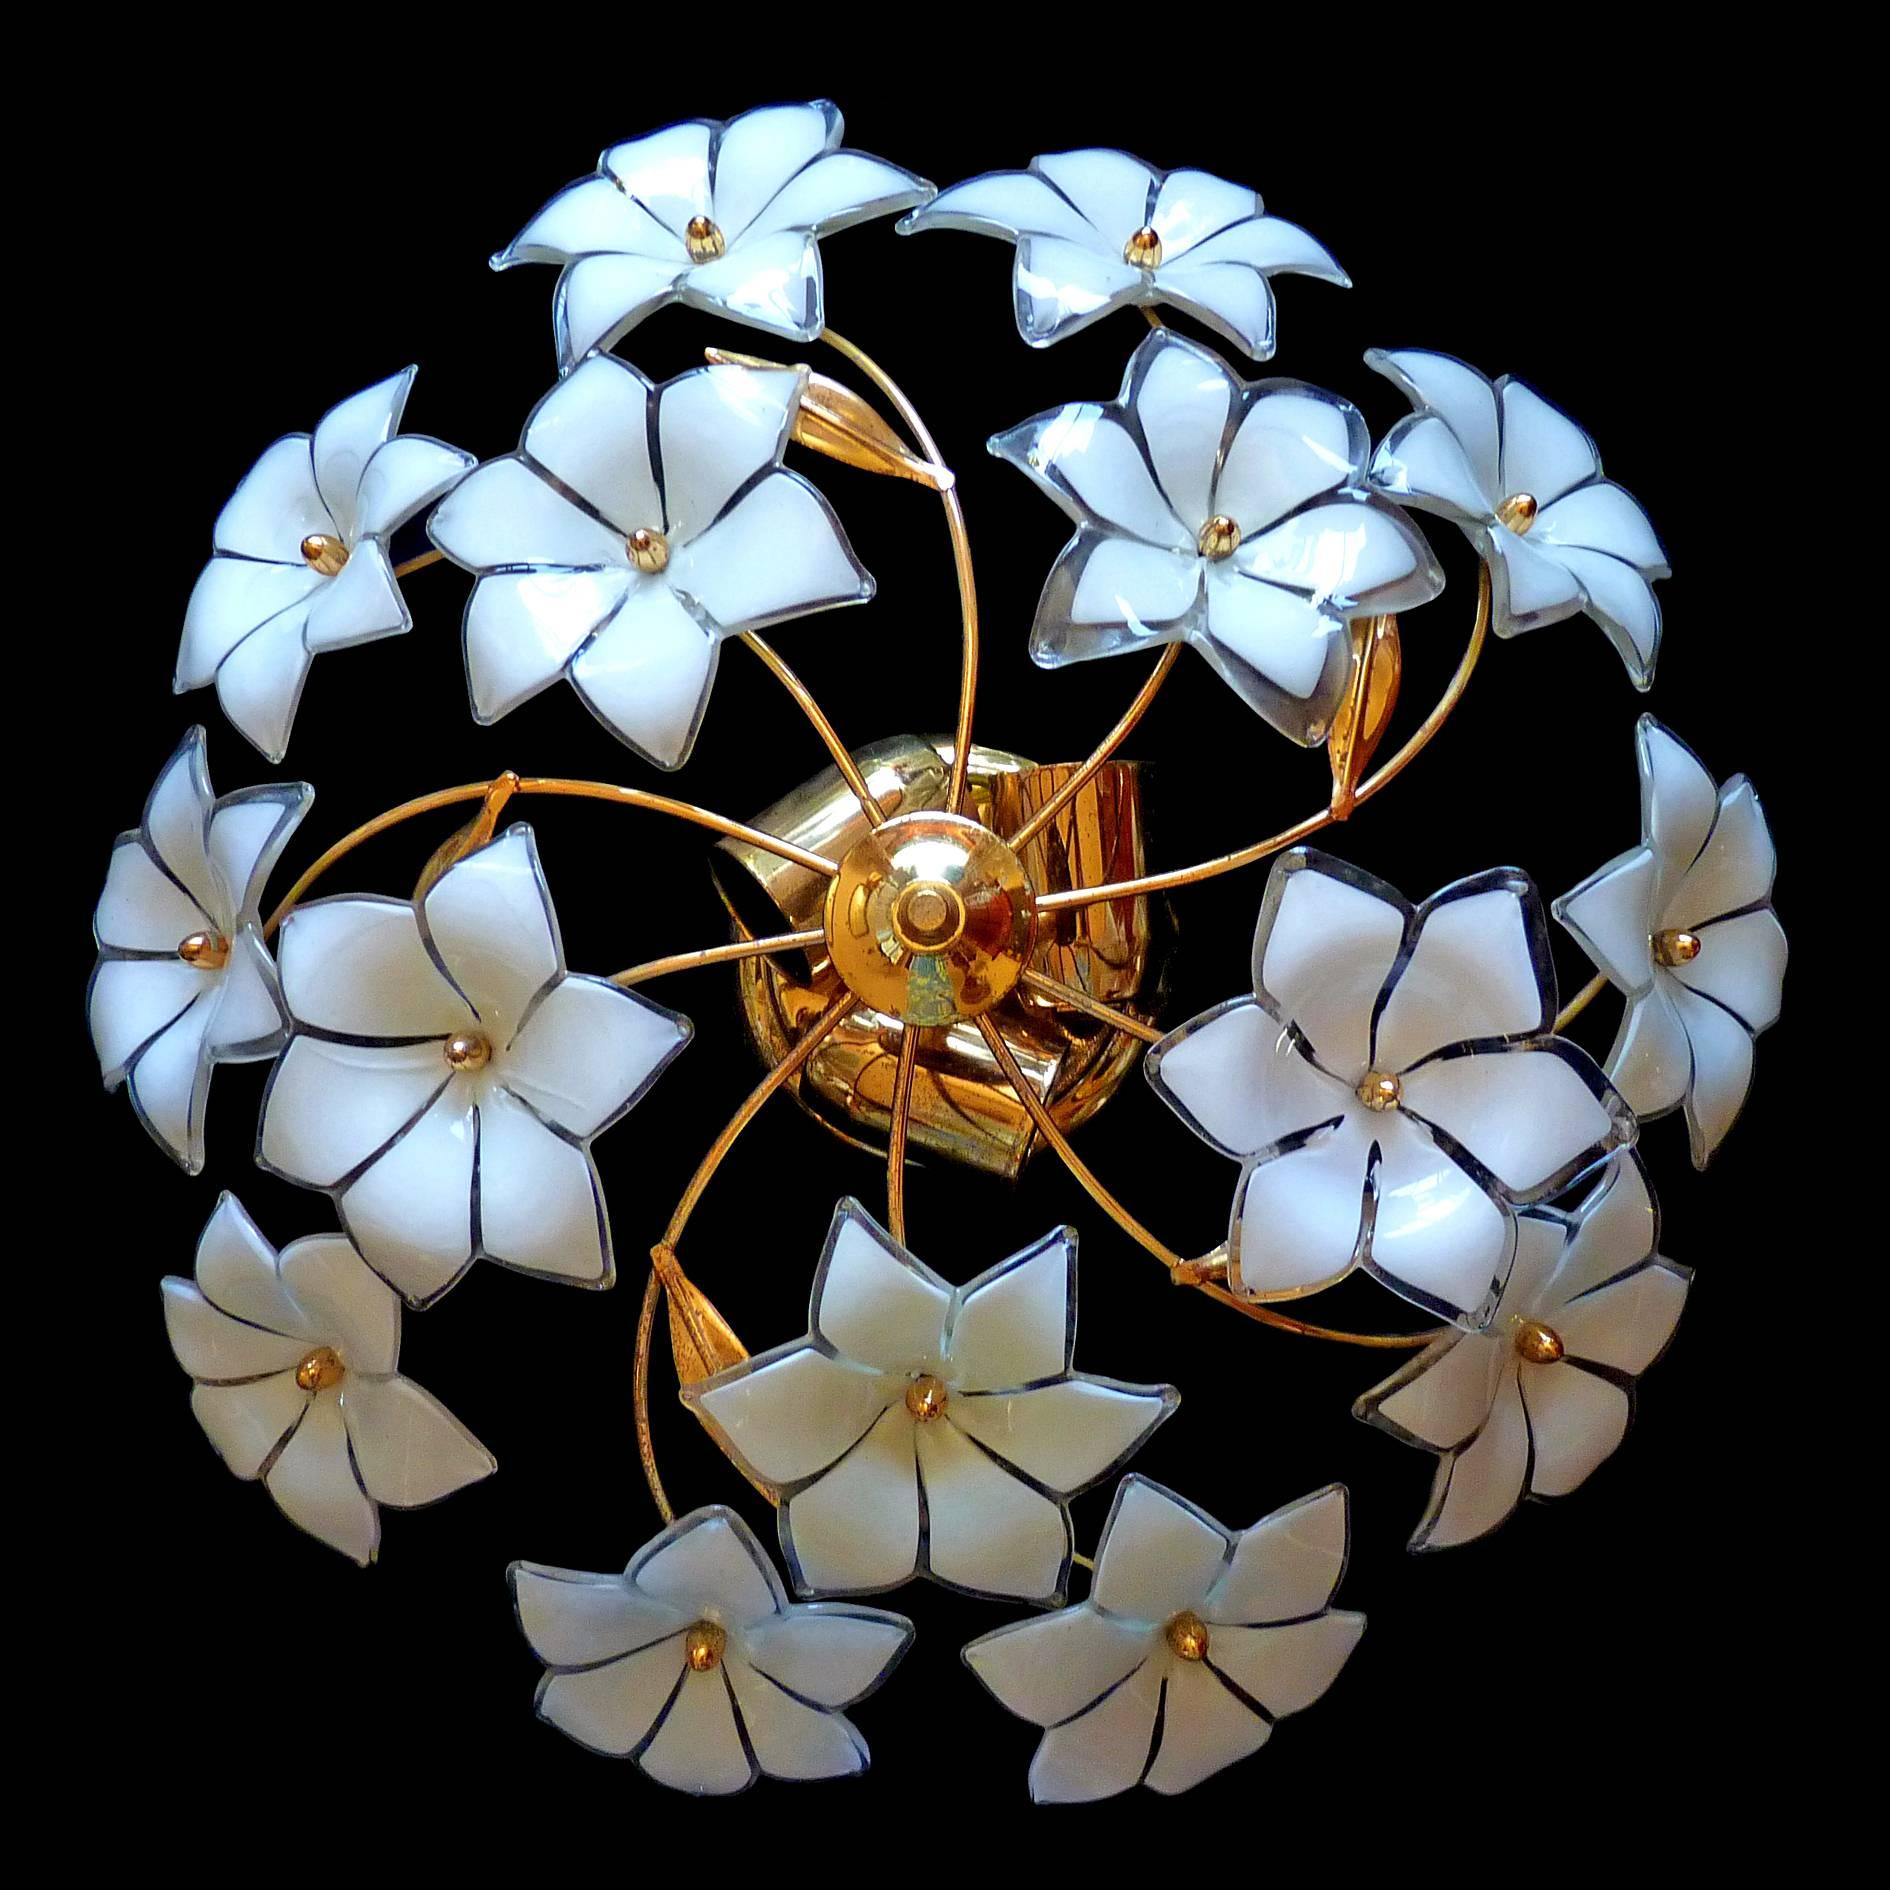 Vintage Italian Murano flower bouquet after Venini art-glass/ handblow white and clear glass flowers and gold-plated brass.
Three light bulbs/ good working condition/ European wiring
Measures: Height: 6